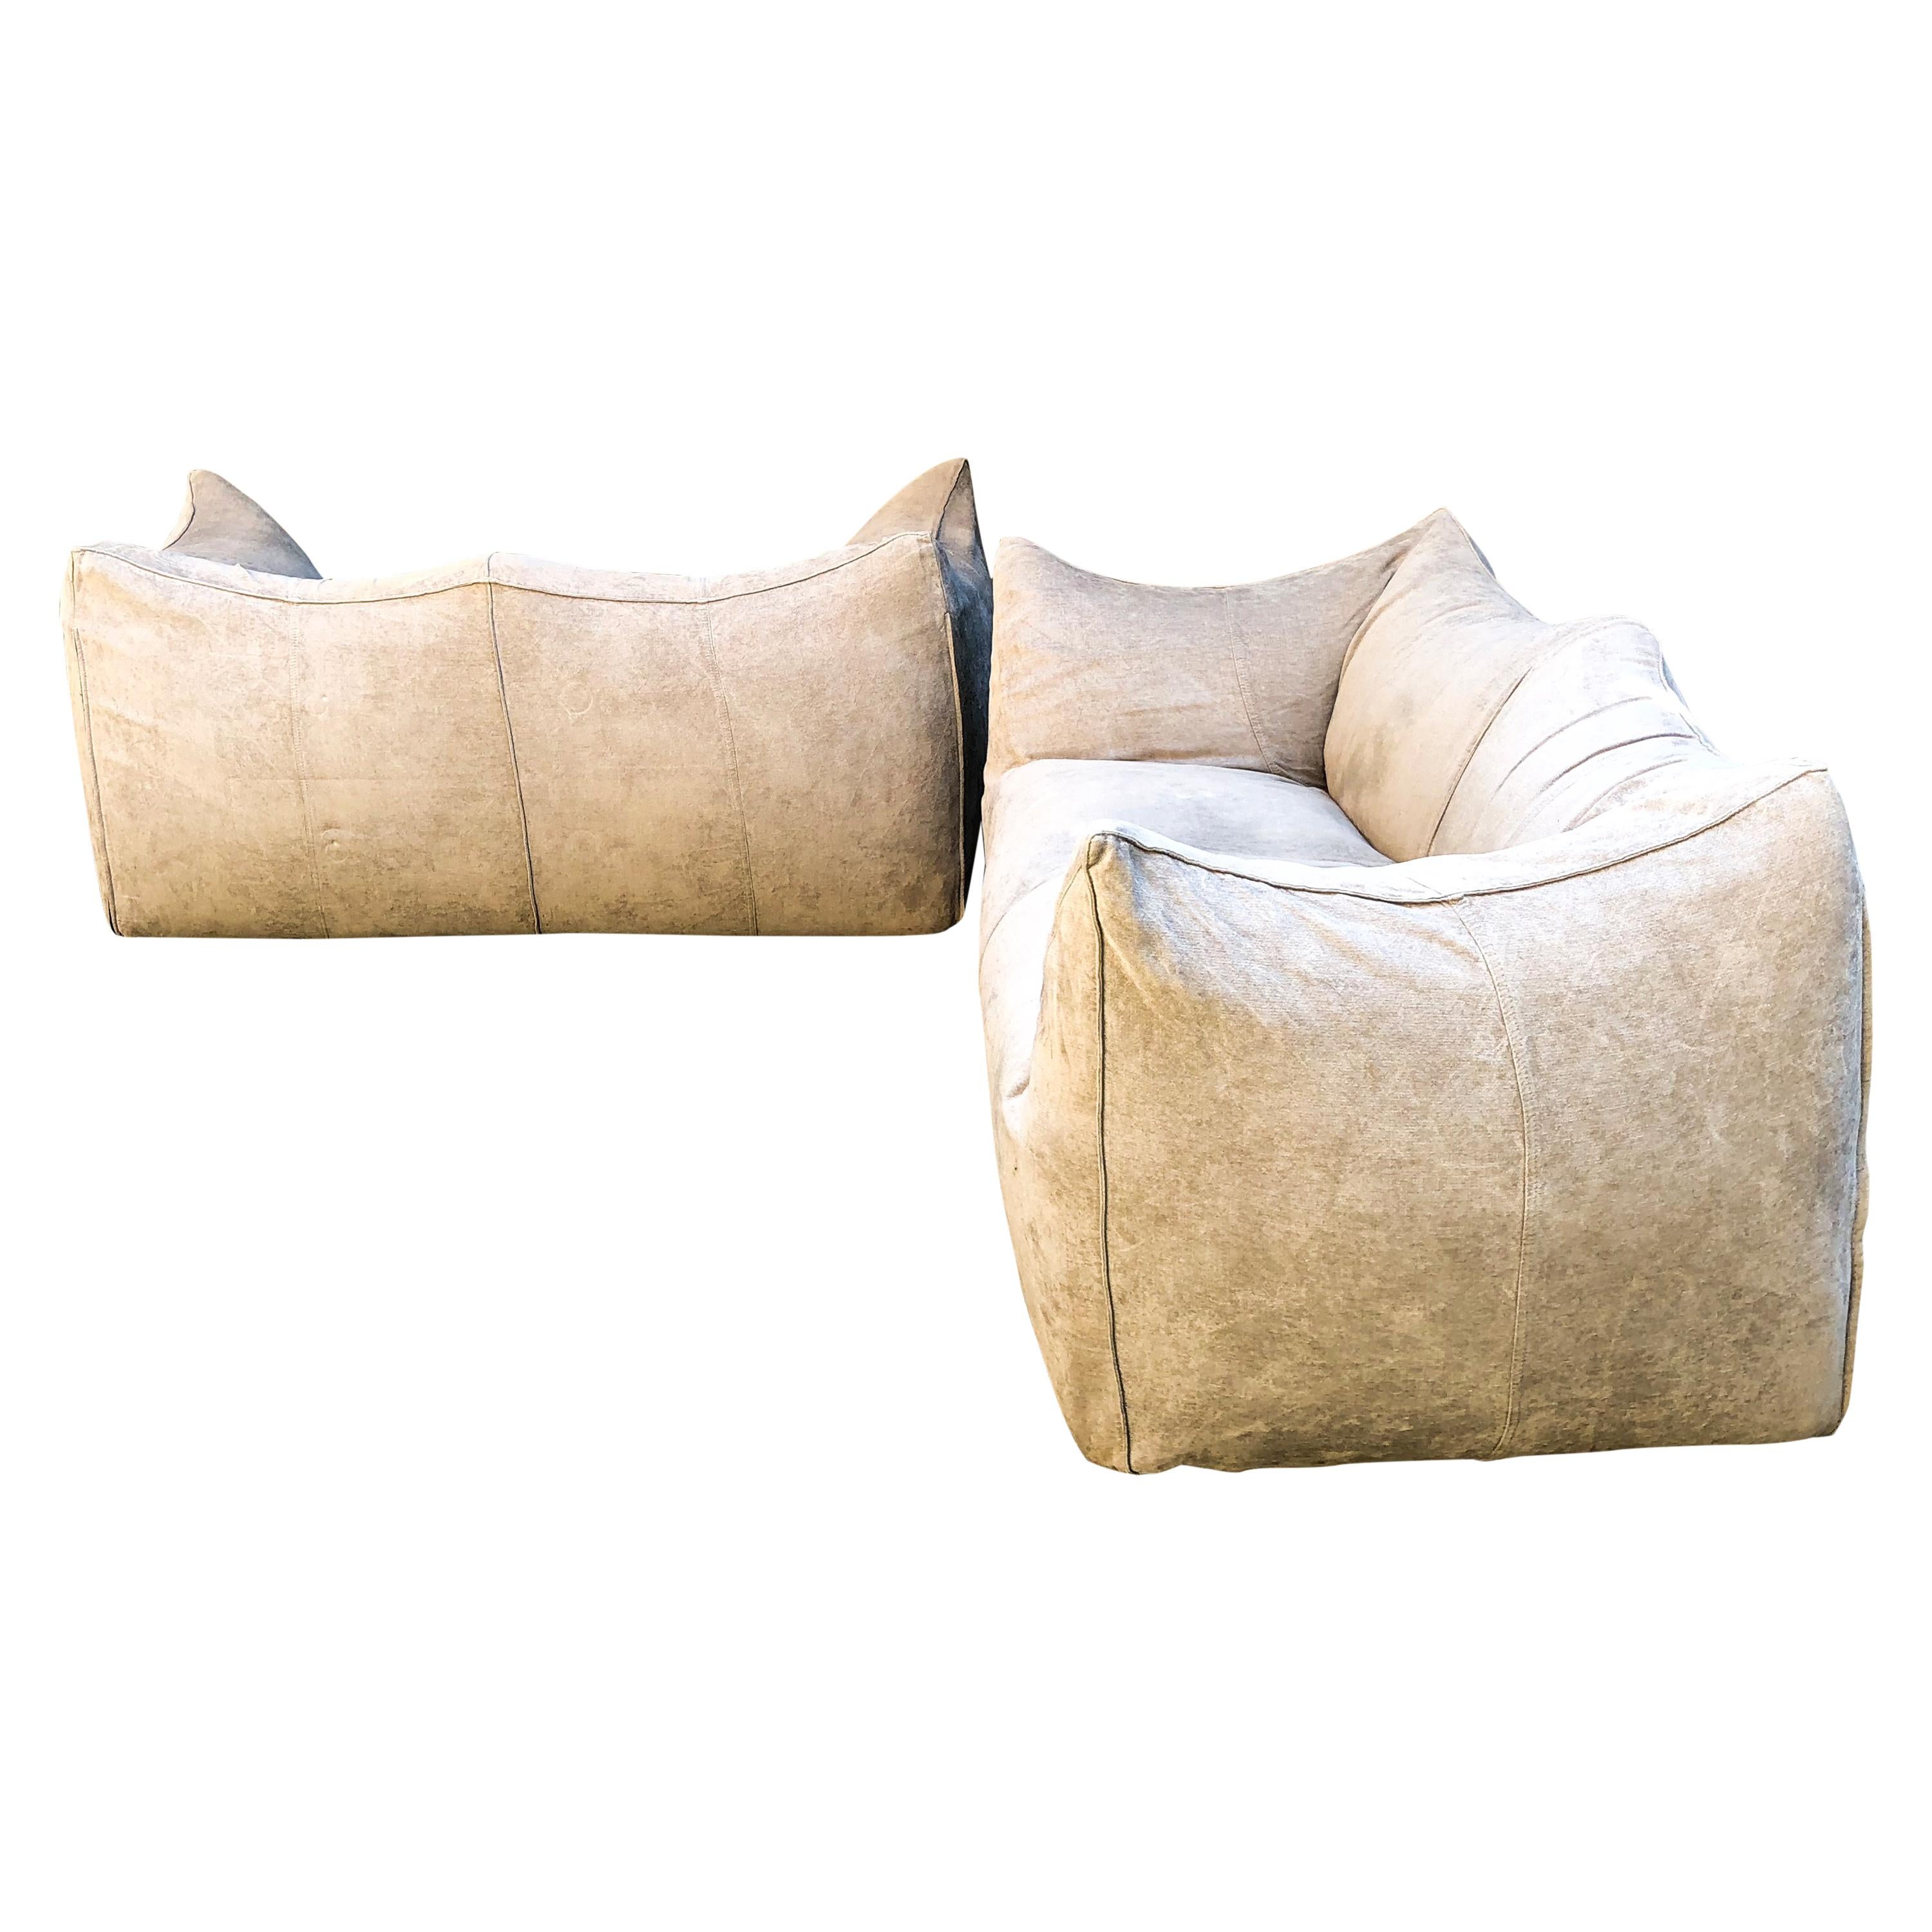 Set of 2 “Bibambola” sofa designed by Mario Bellini for B&B Italia.

Original vintage version from 1976, recently reupholstered by the previous owner with a light grey fabric.

This comfortable settee is bulky and playful, shaped as if it is merely